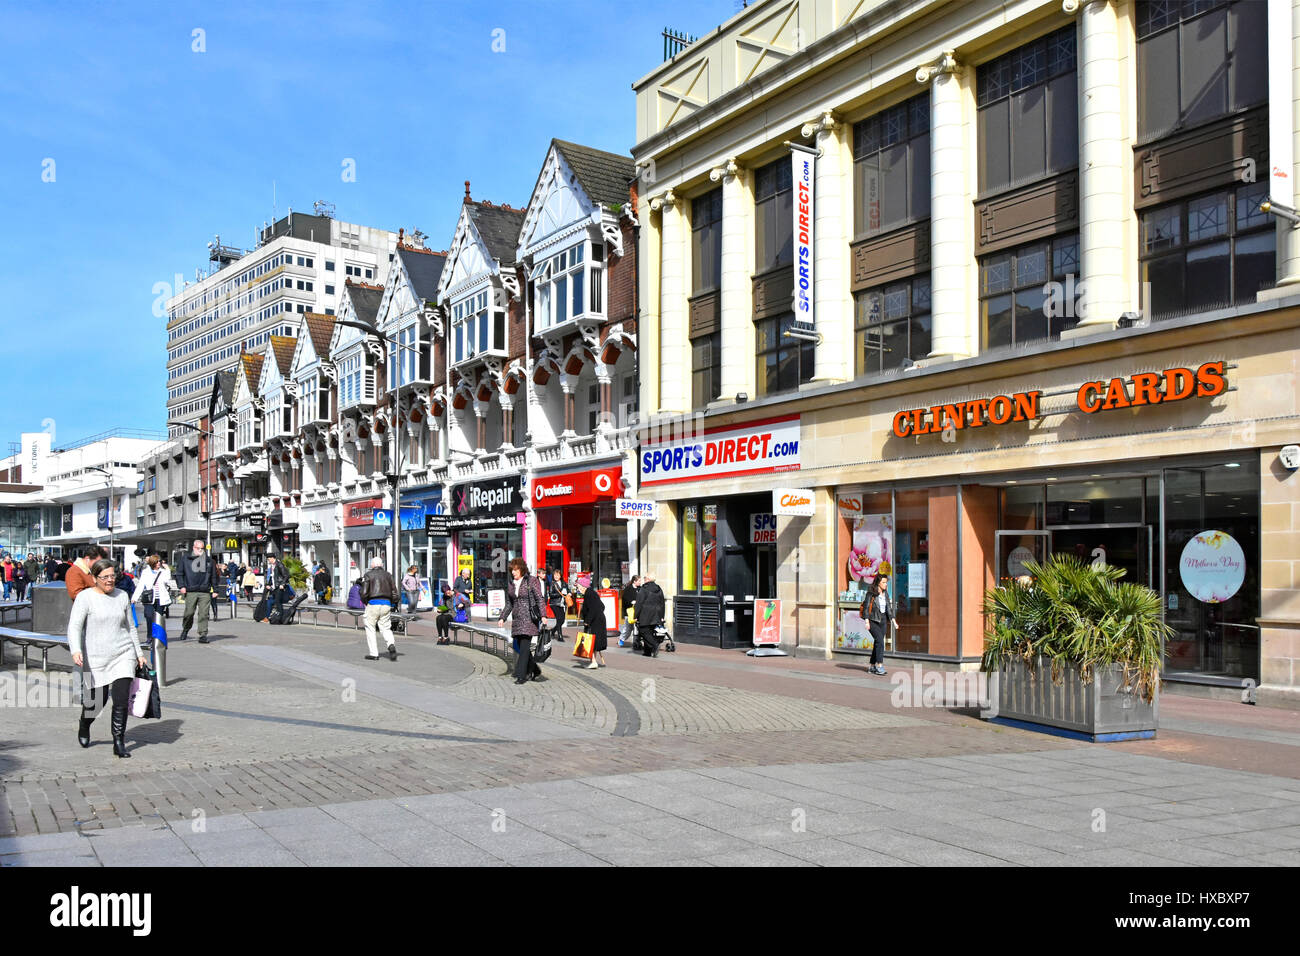 Shopping in Southend on Sea high street retail shops & shoppers town centre pedestrianised shop front store Clinton Cards & Sports Direct  England UK Stock Photo